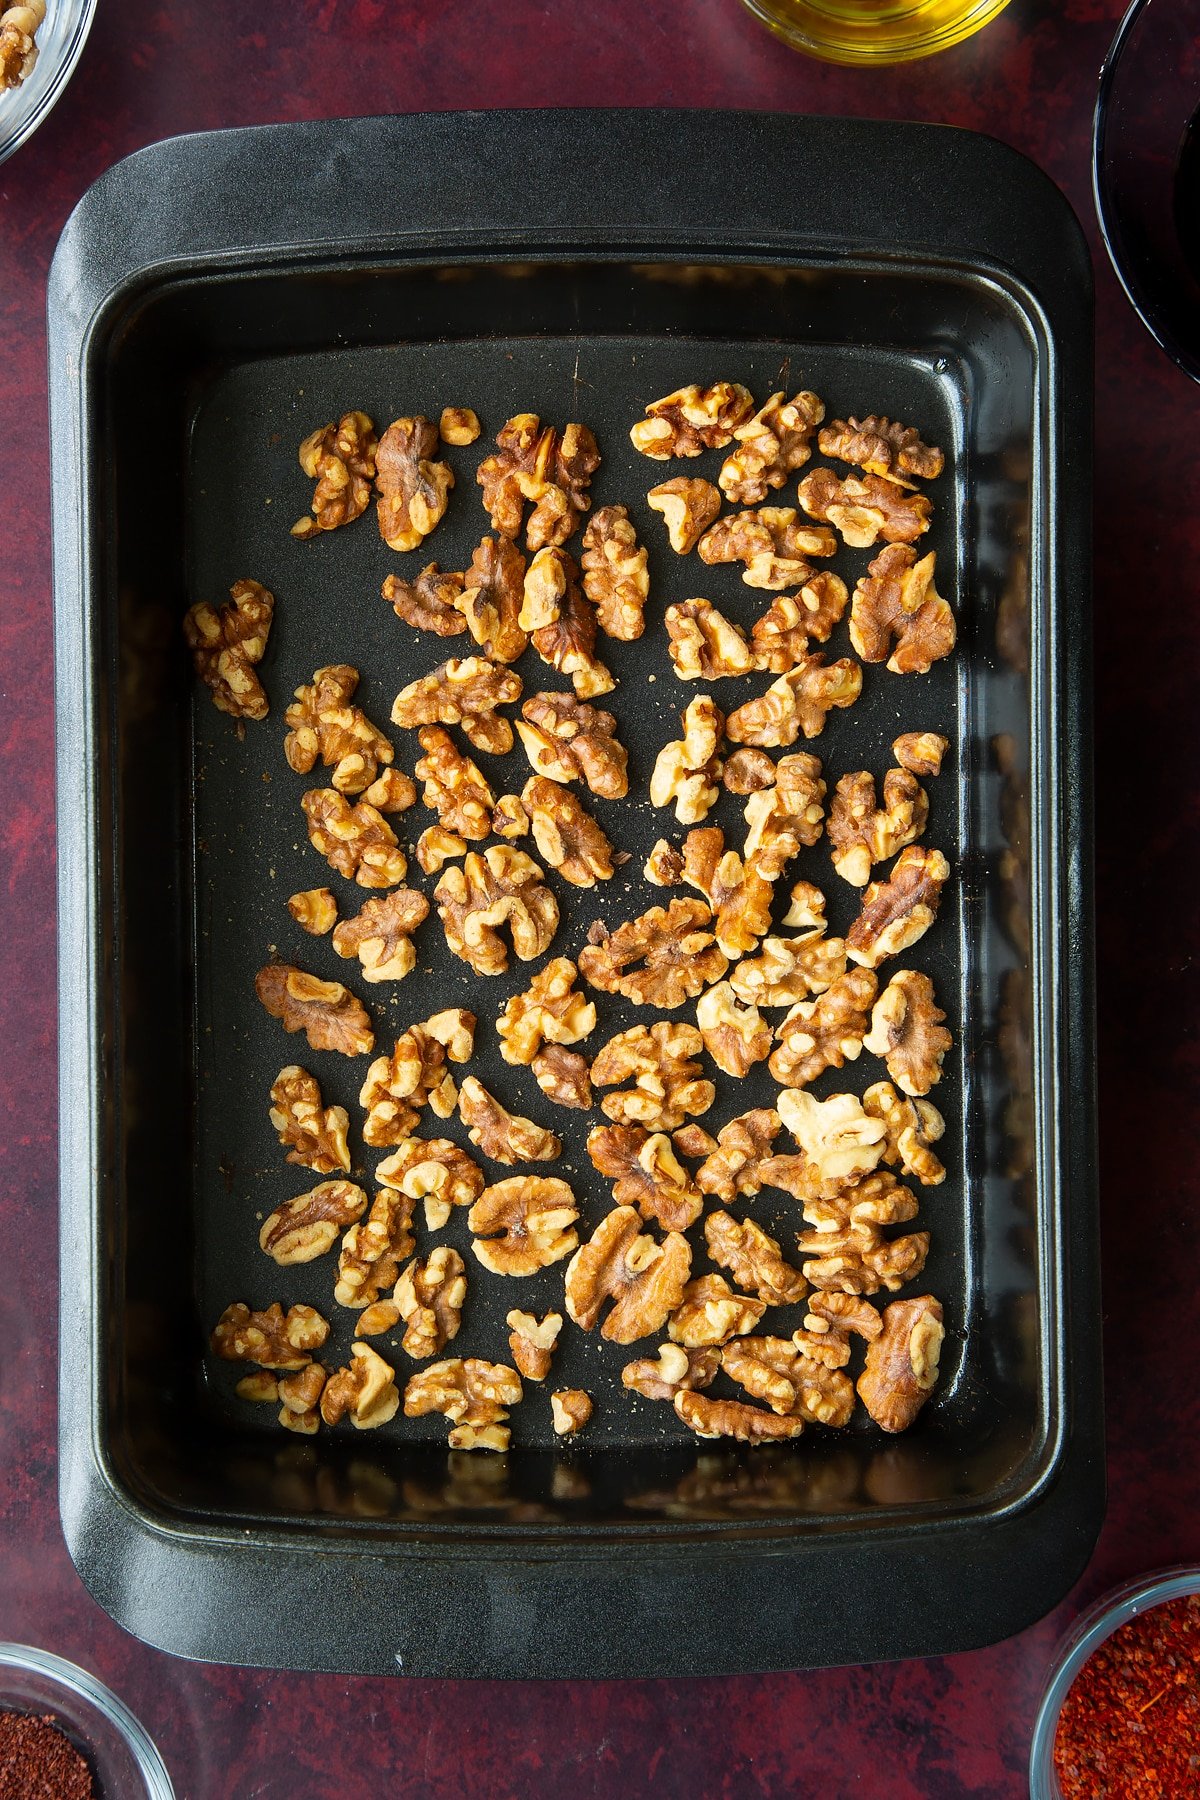 whole toasted walnuts spread into an even layer in the base of a baking tray.